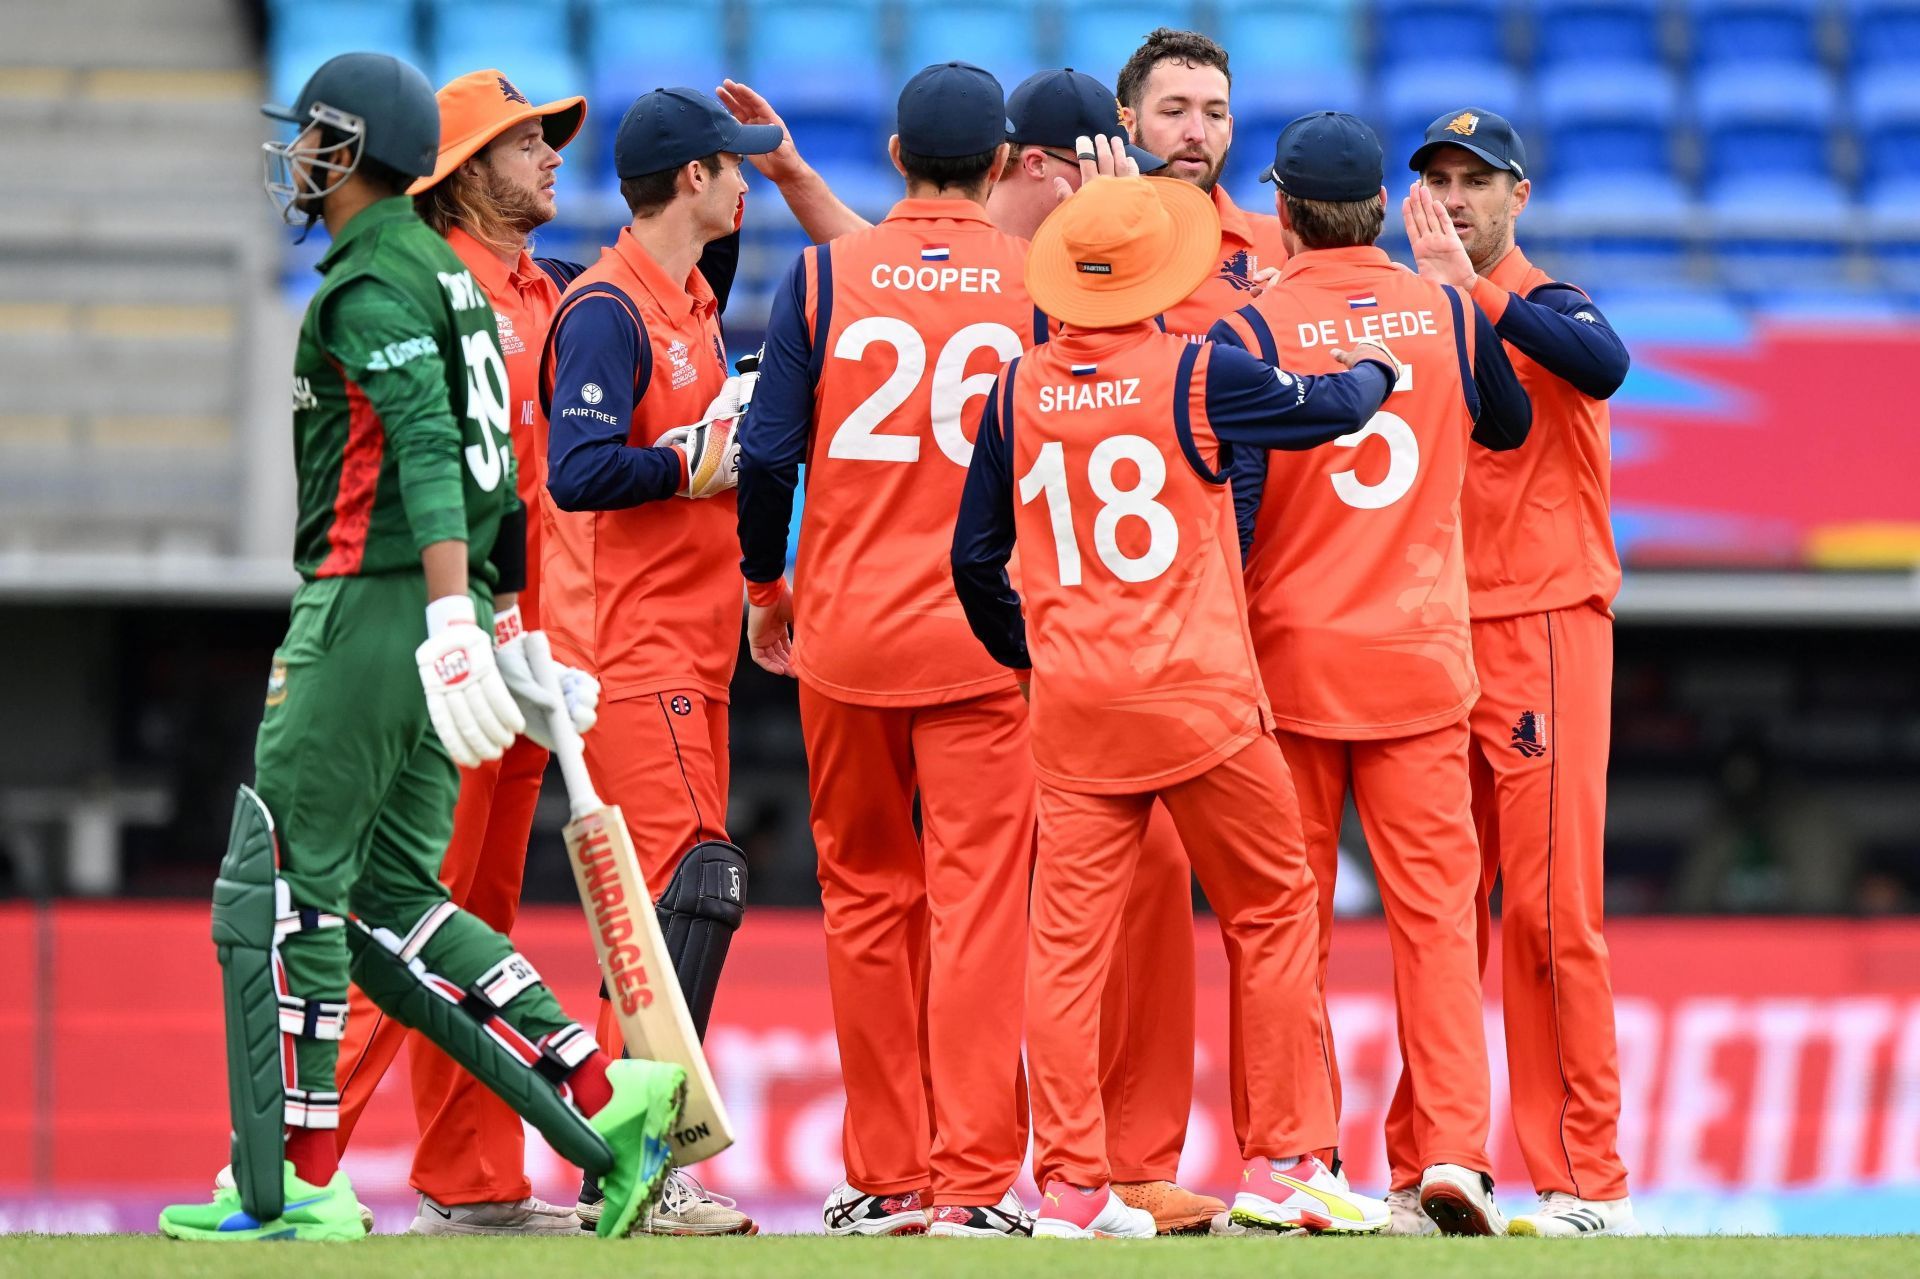 Bangladesh were restricted to a below-par score by the Netherlands bowlers. [P/C: T20 World Cup/Twitter]